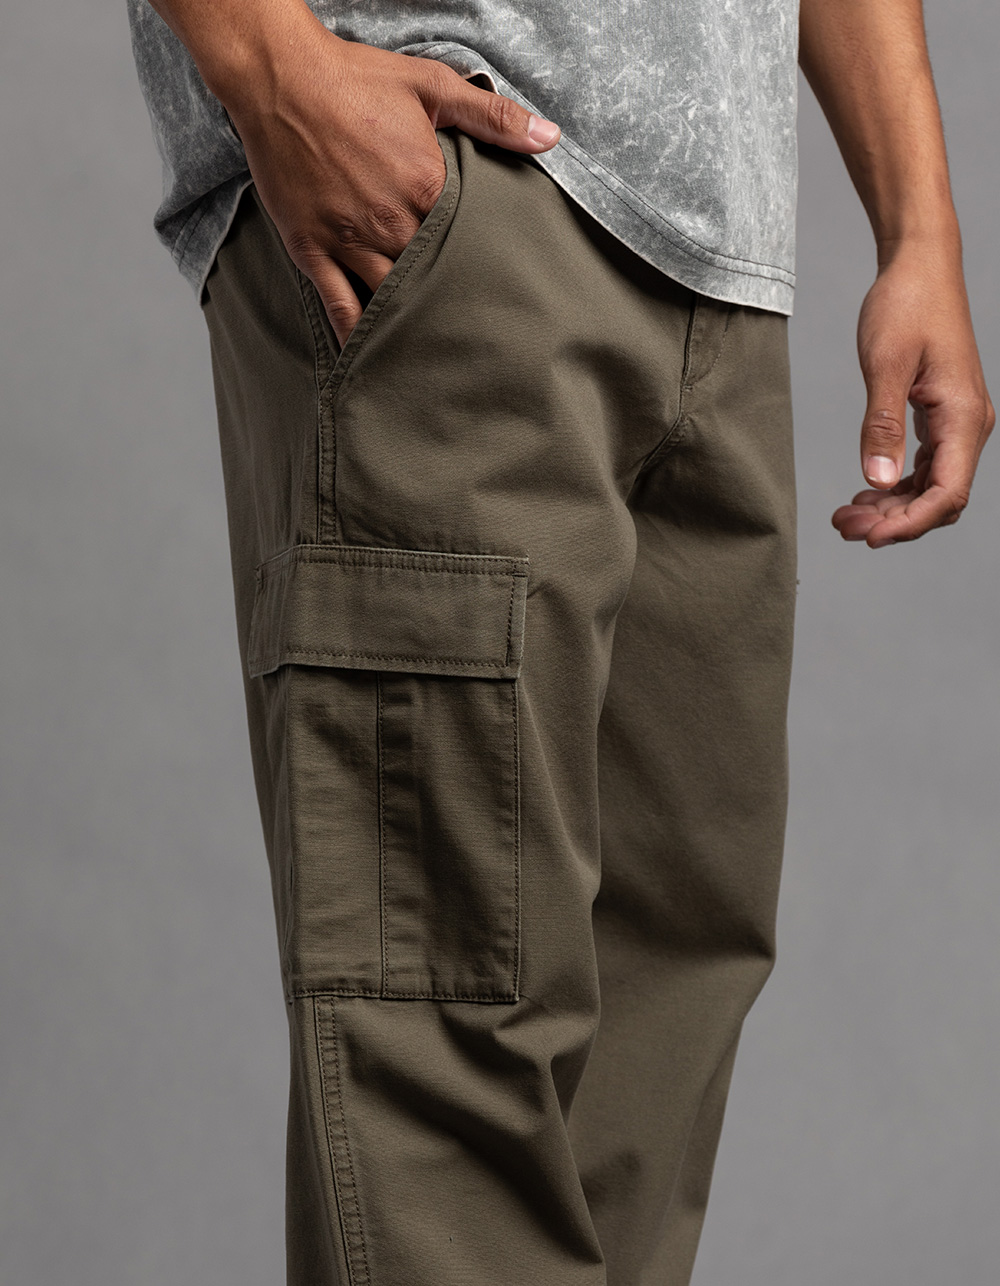 Black Cargo Pants For Men Men's Mid-waist Zip Cargo Pants Relaxed Fit Solid Cargo  Trousers With Multi-pocket - Walmart.com